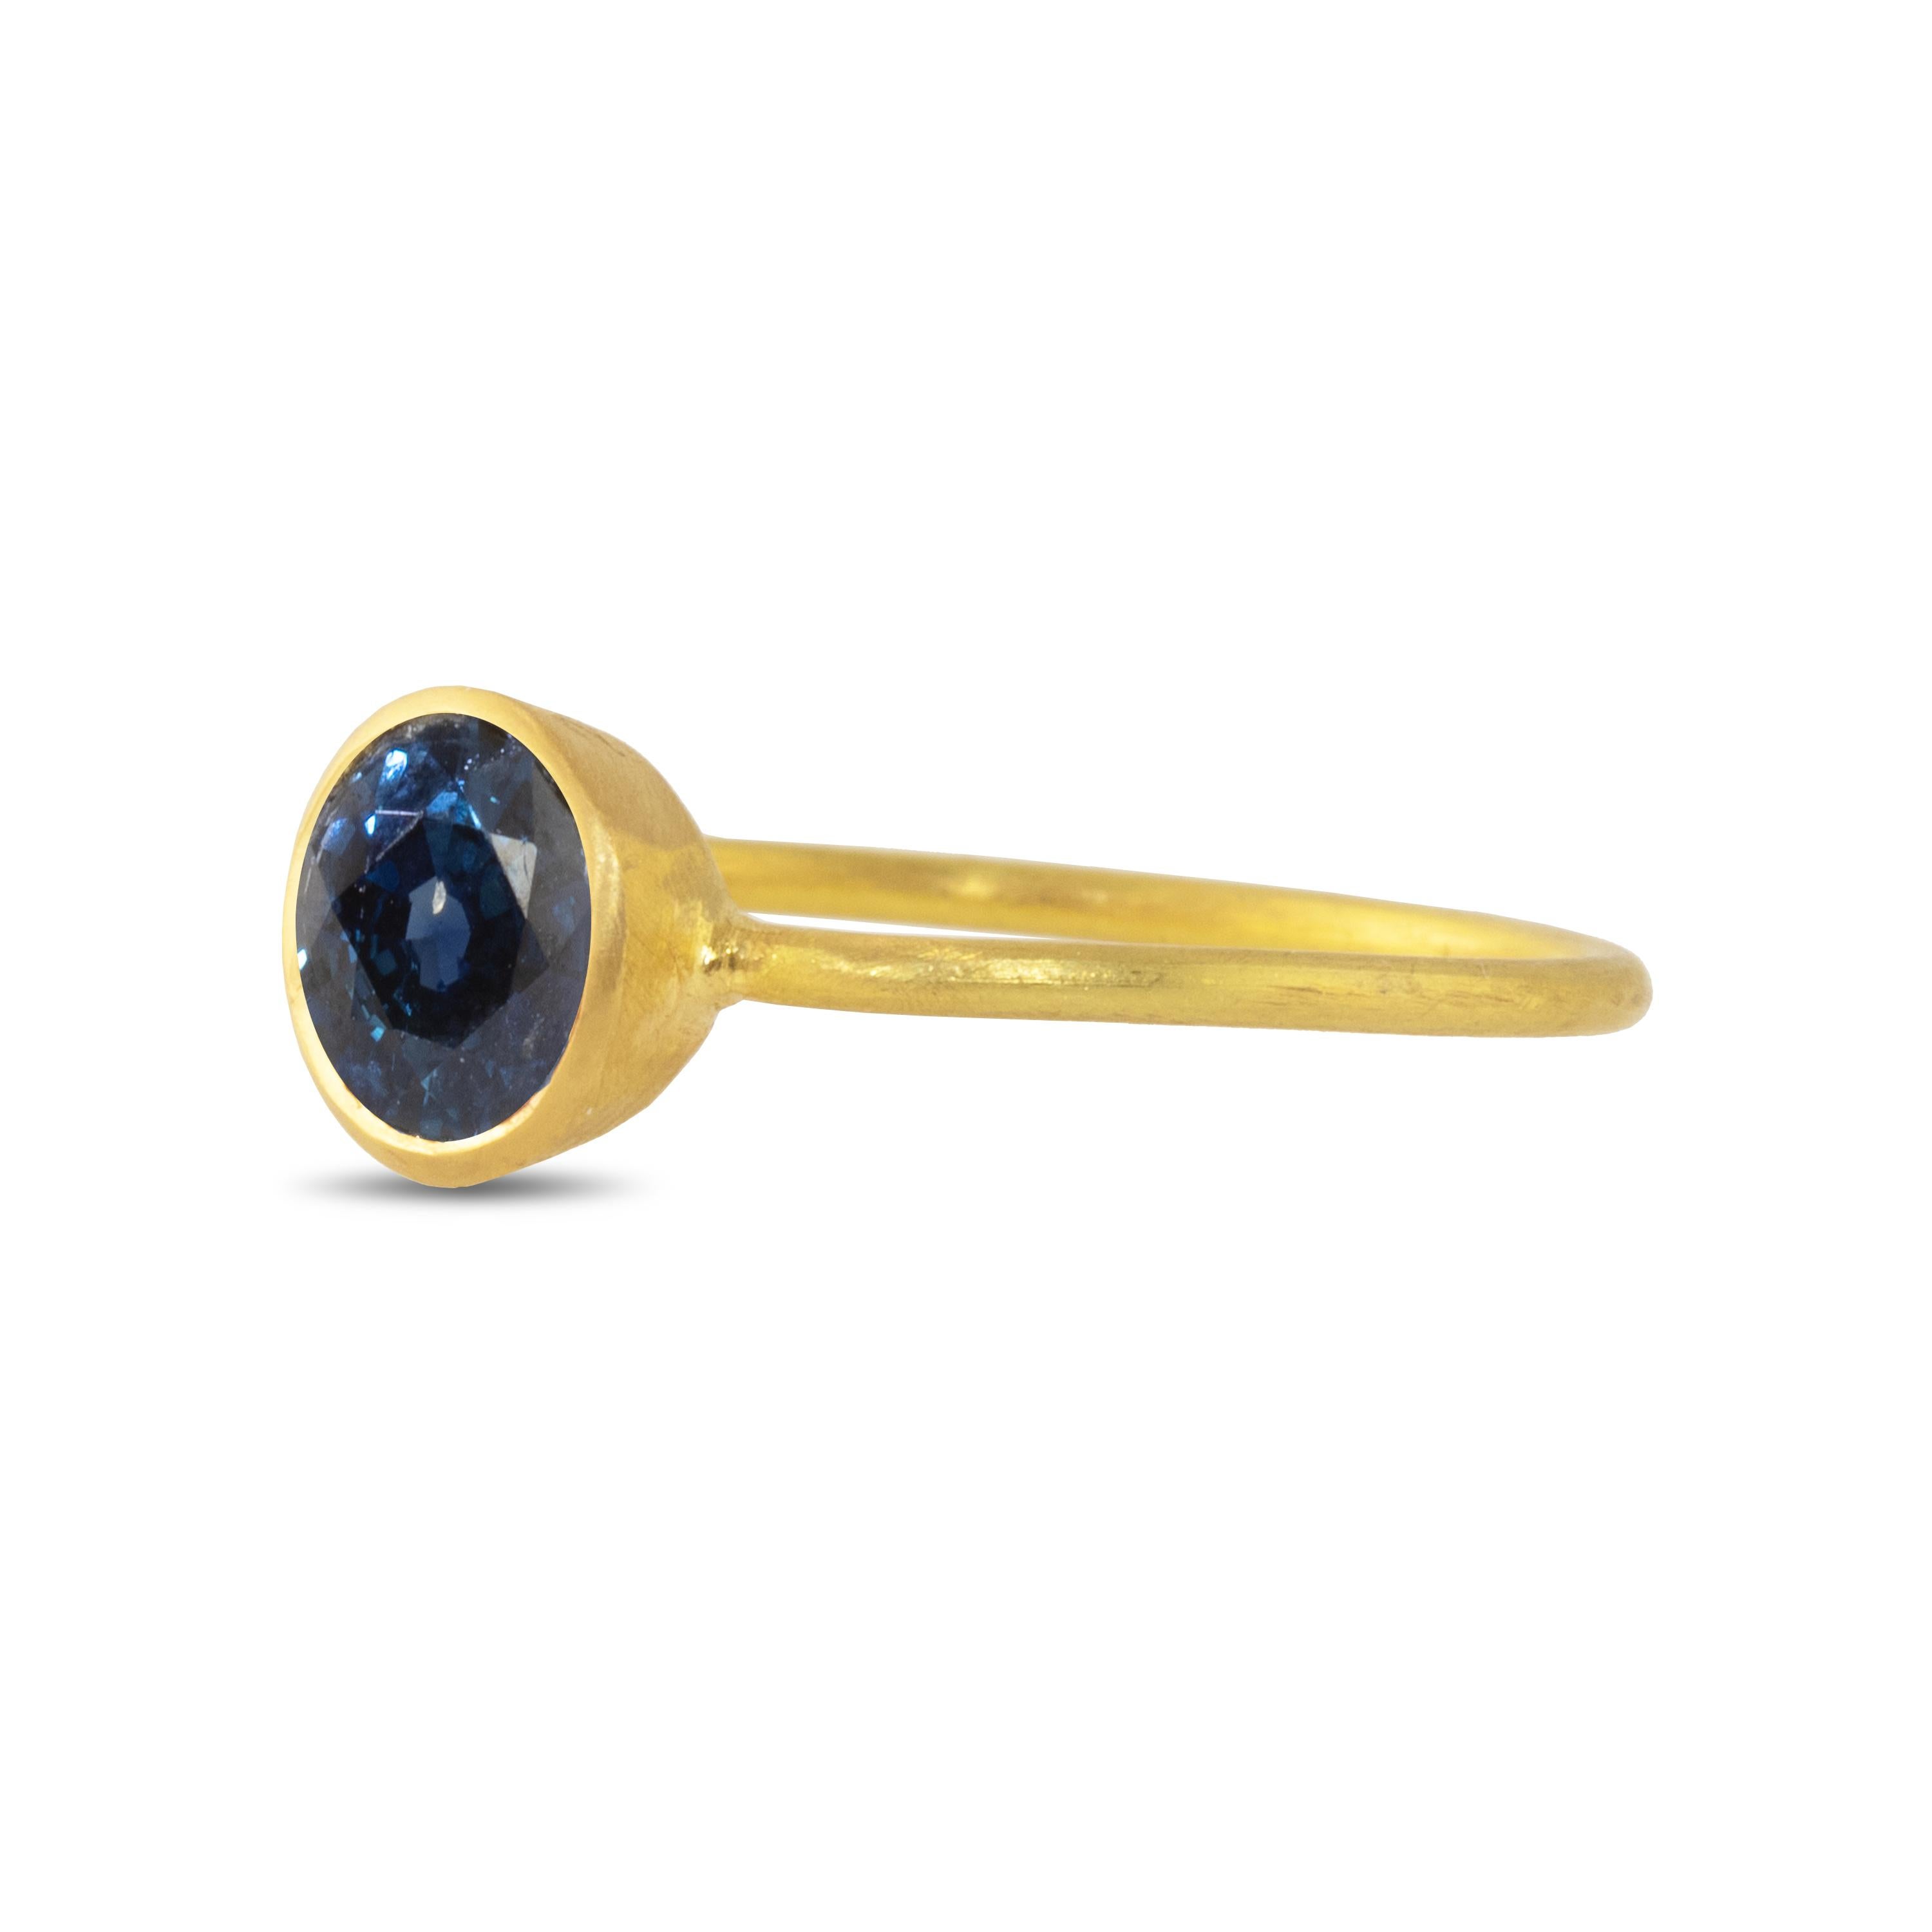 The 22k gold ring features a deep, intense natural blue sapphire. Wear this alone or in combination with other rings for a pop of color.  The sapphire is 6.65mm and .80 carats.

Sapphire is also known as a 